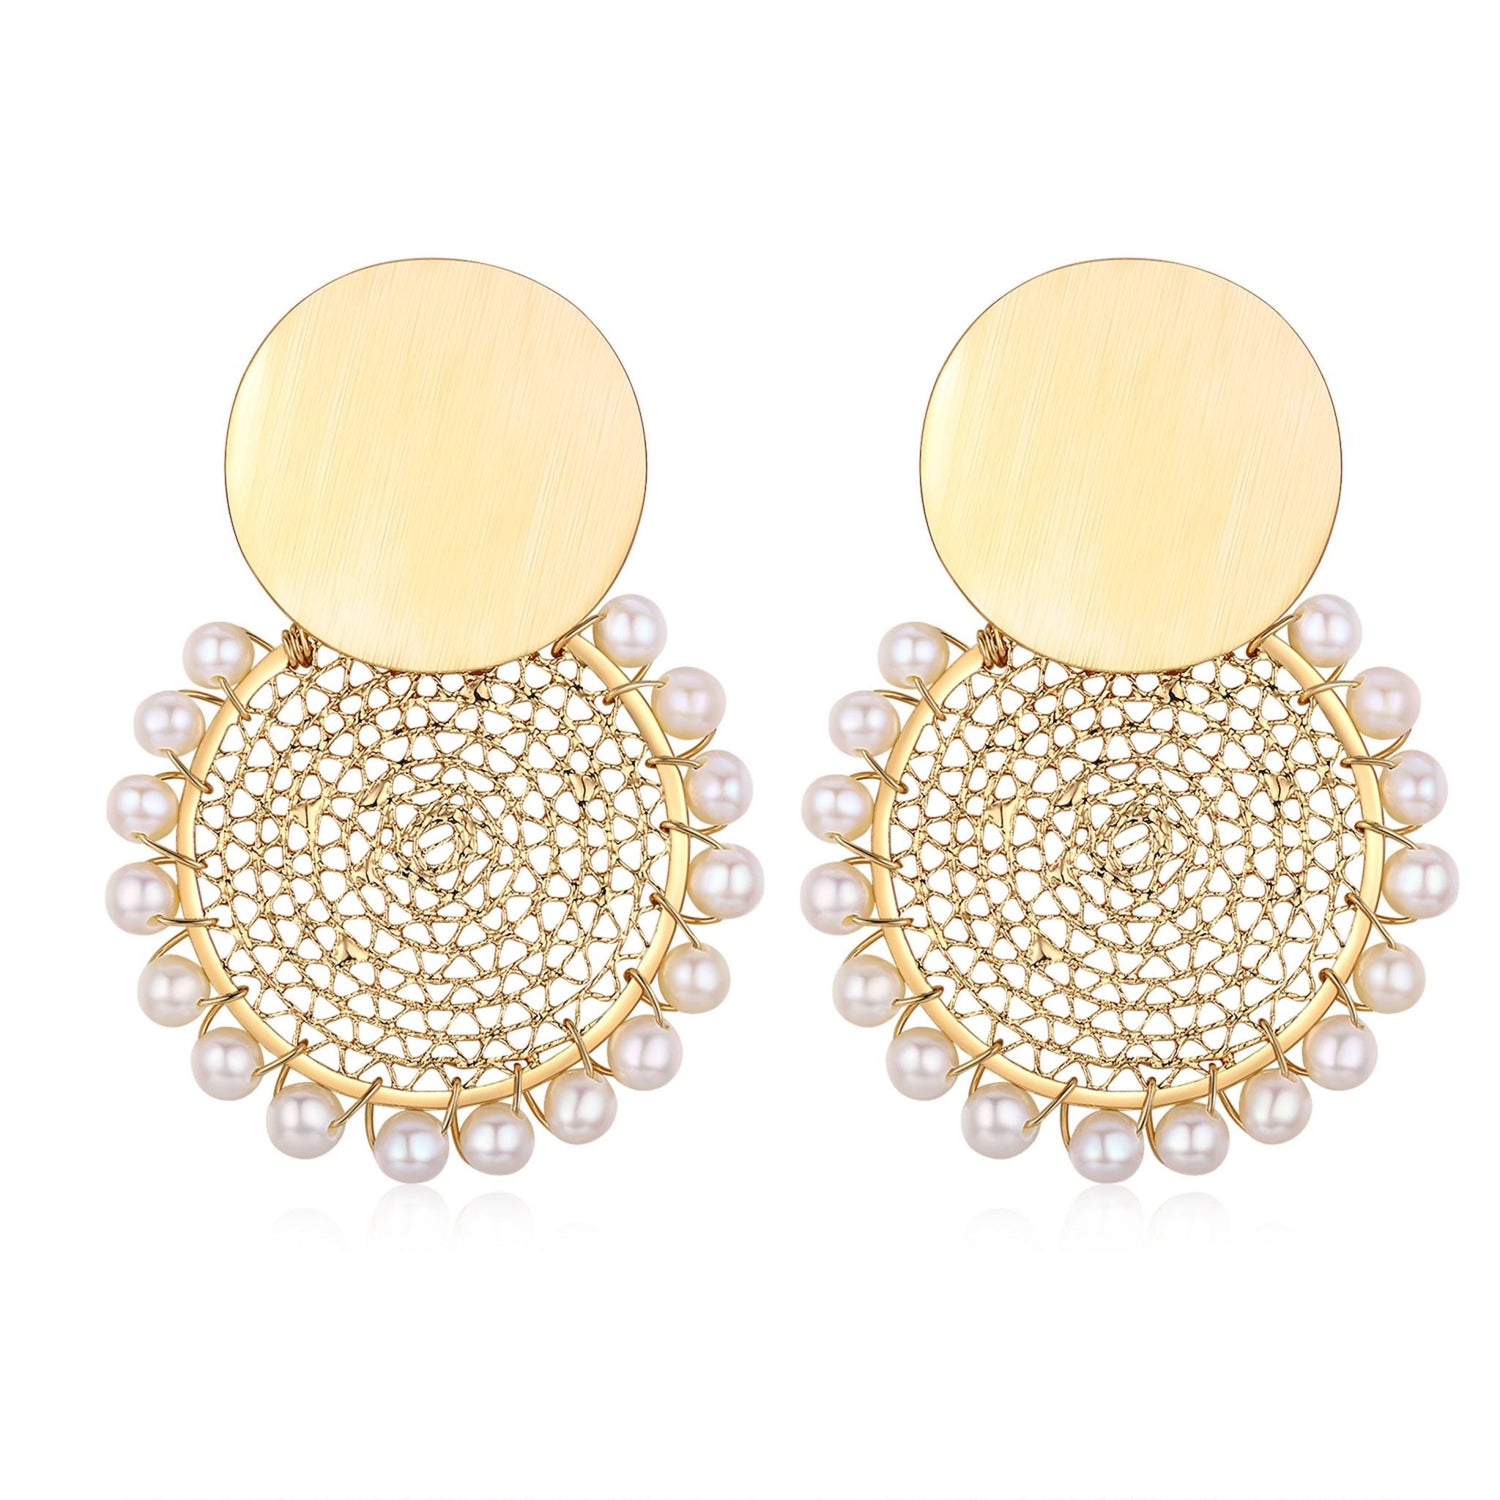 Retro Carved Gold Pearl Earrings - Timeless Pearl